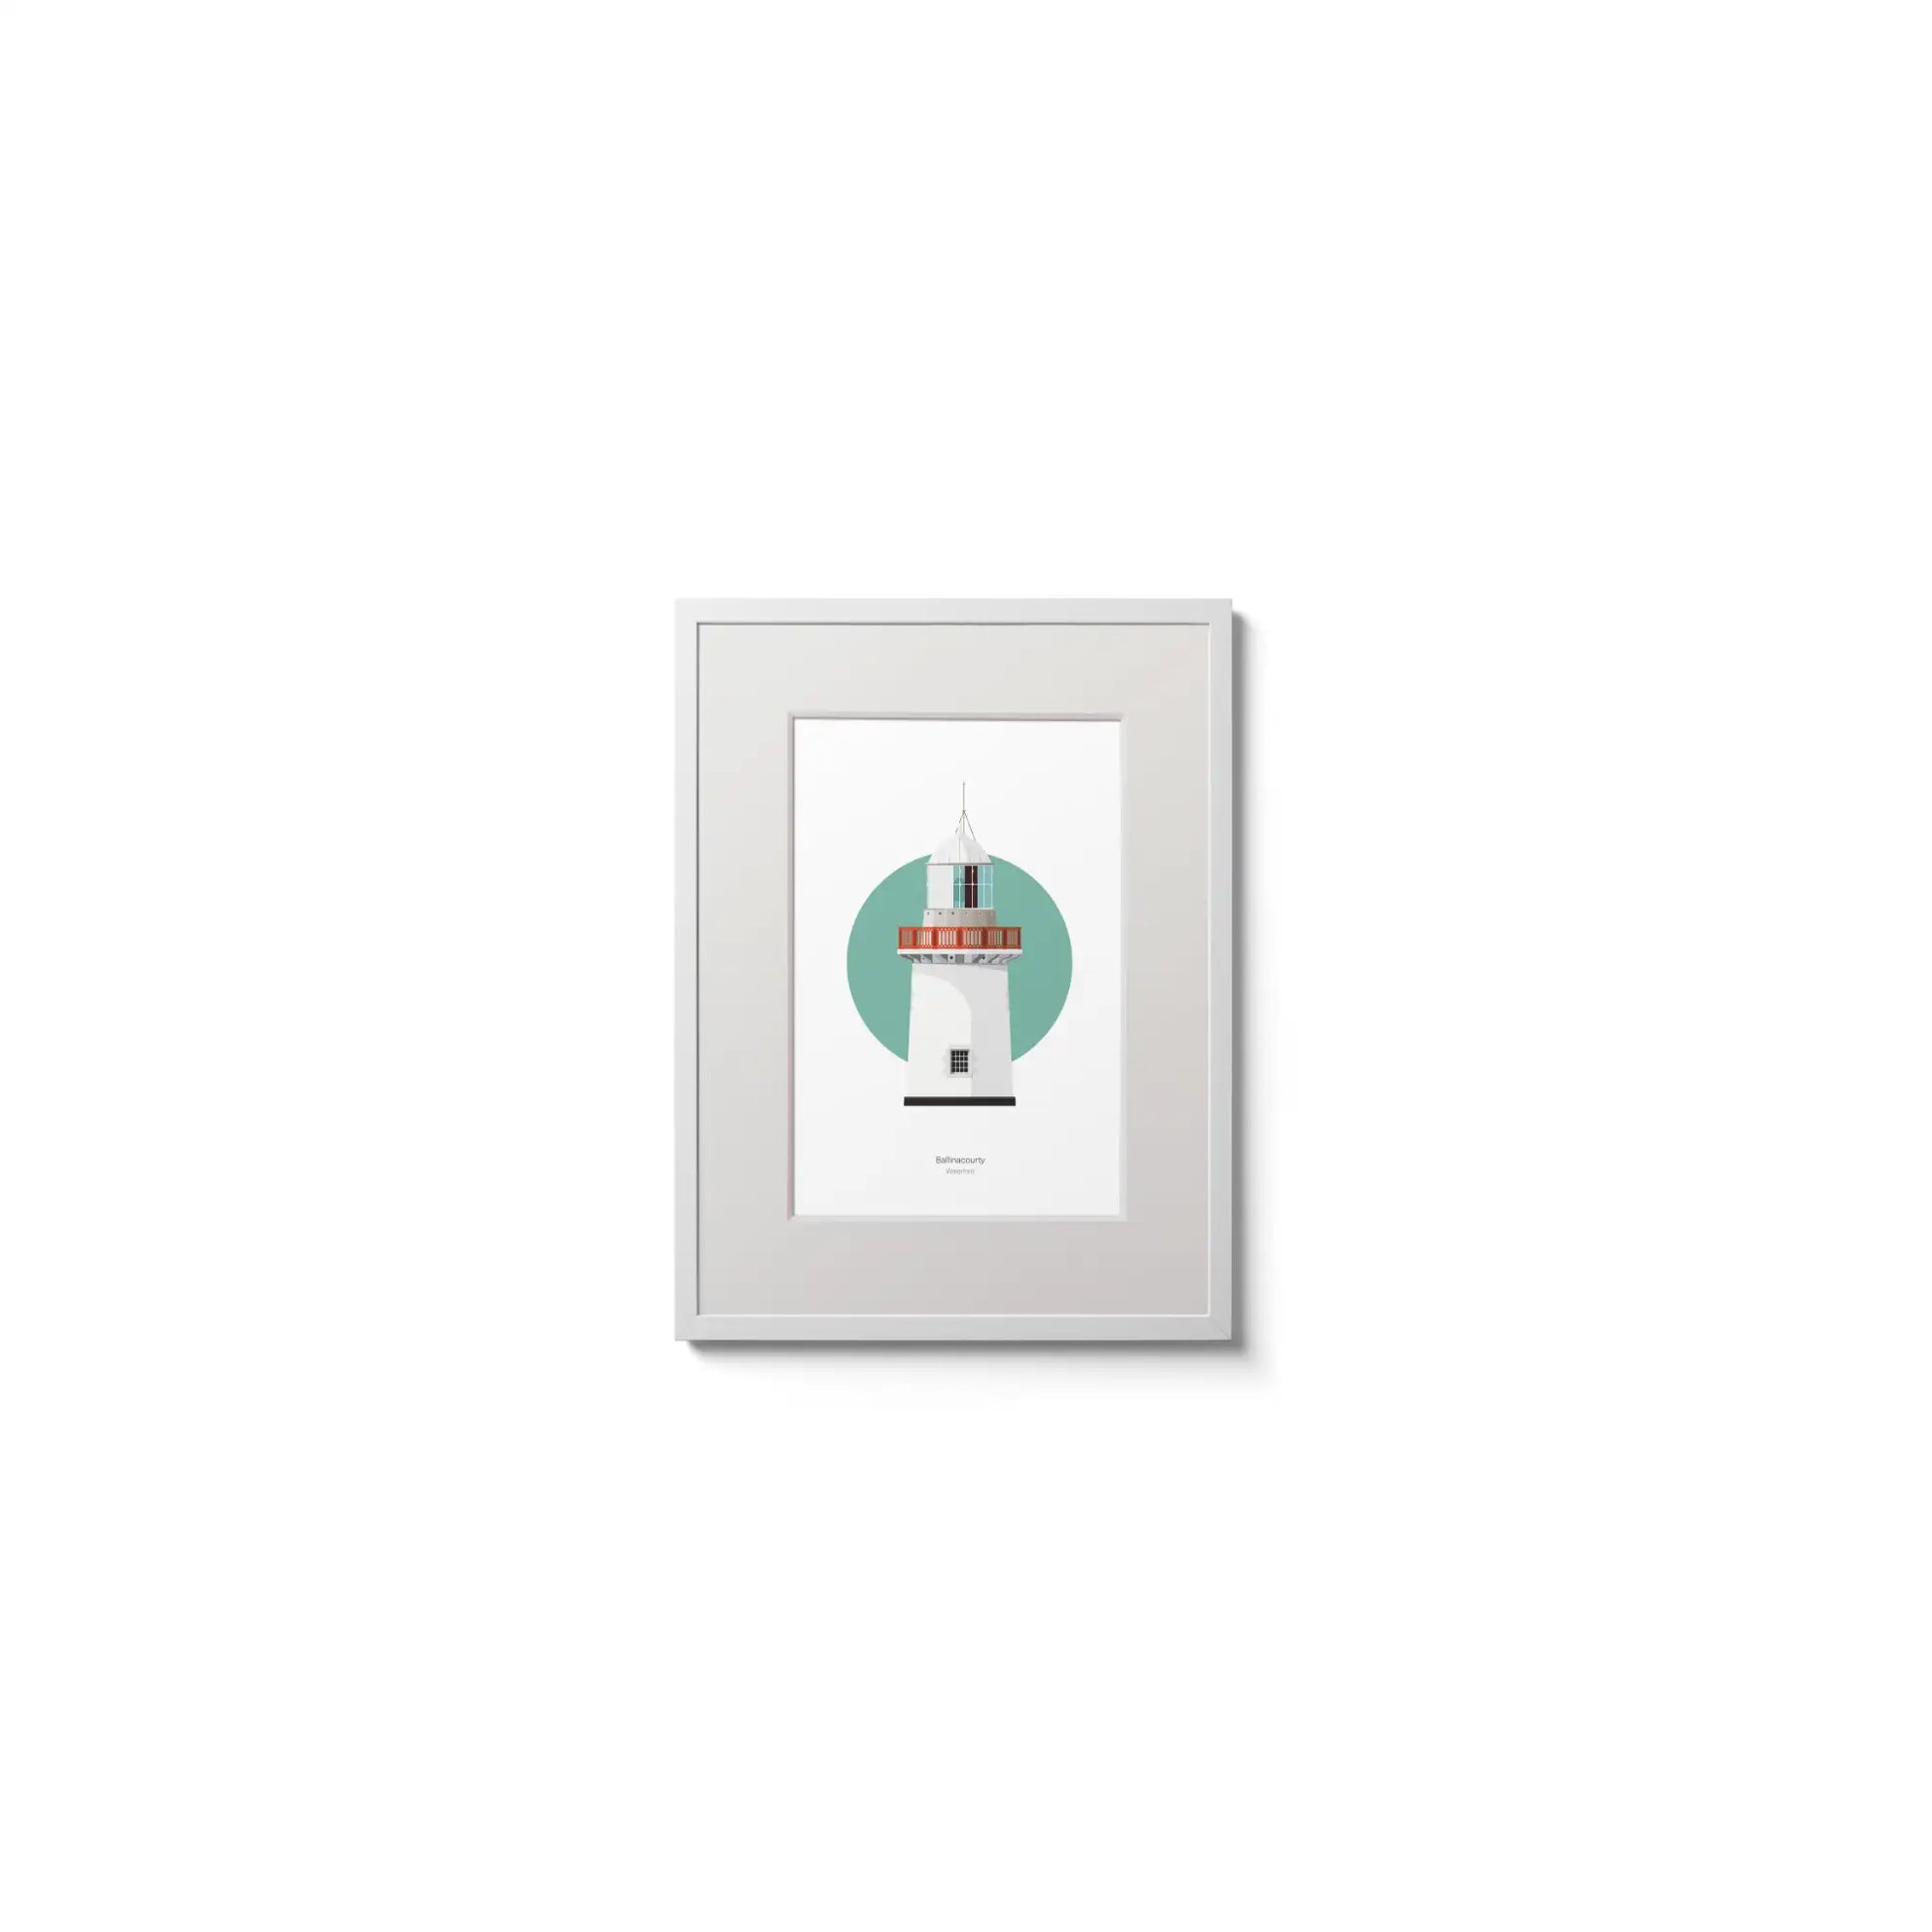 Illustration of Ballinacourty lighthouse on a white background inside light blue square,  in a white frame measuring 15x20cm.